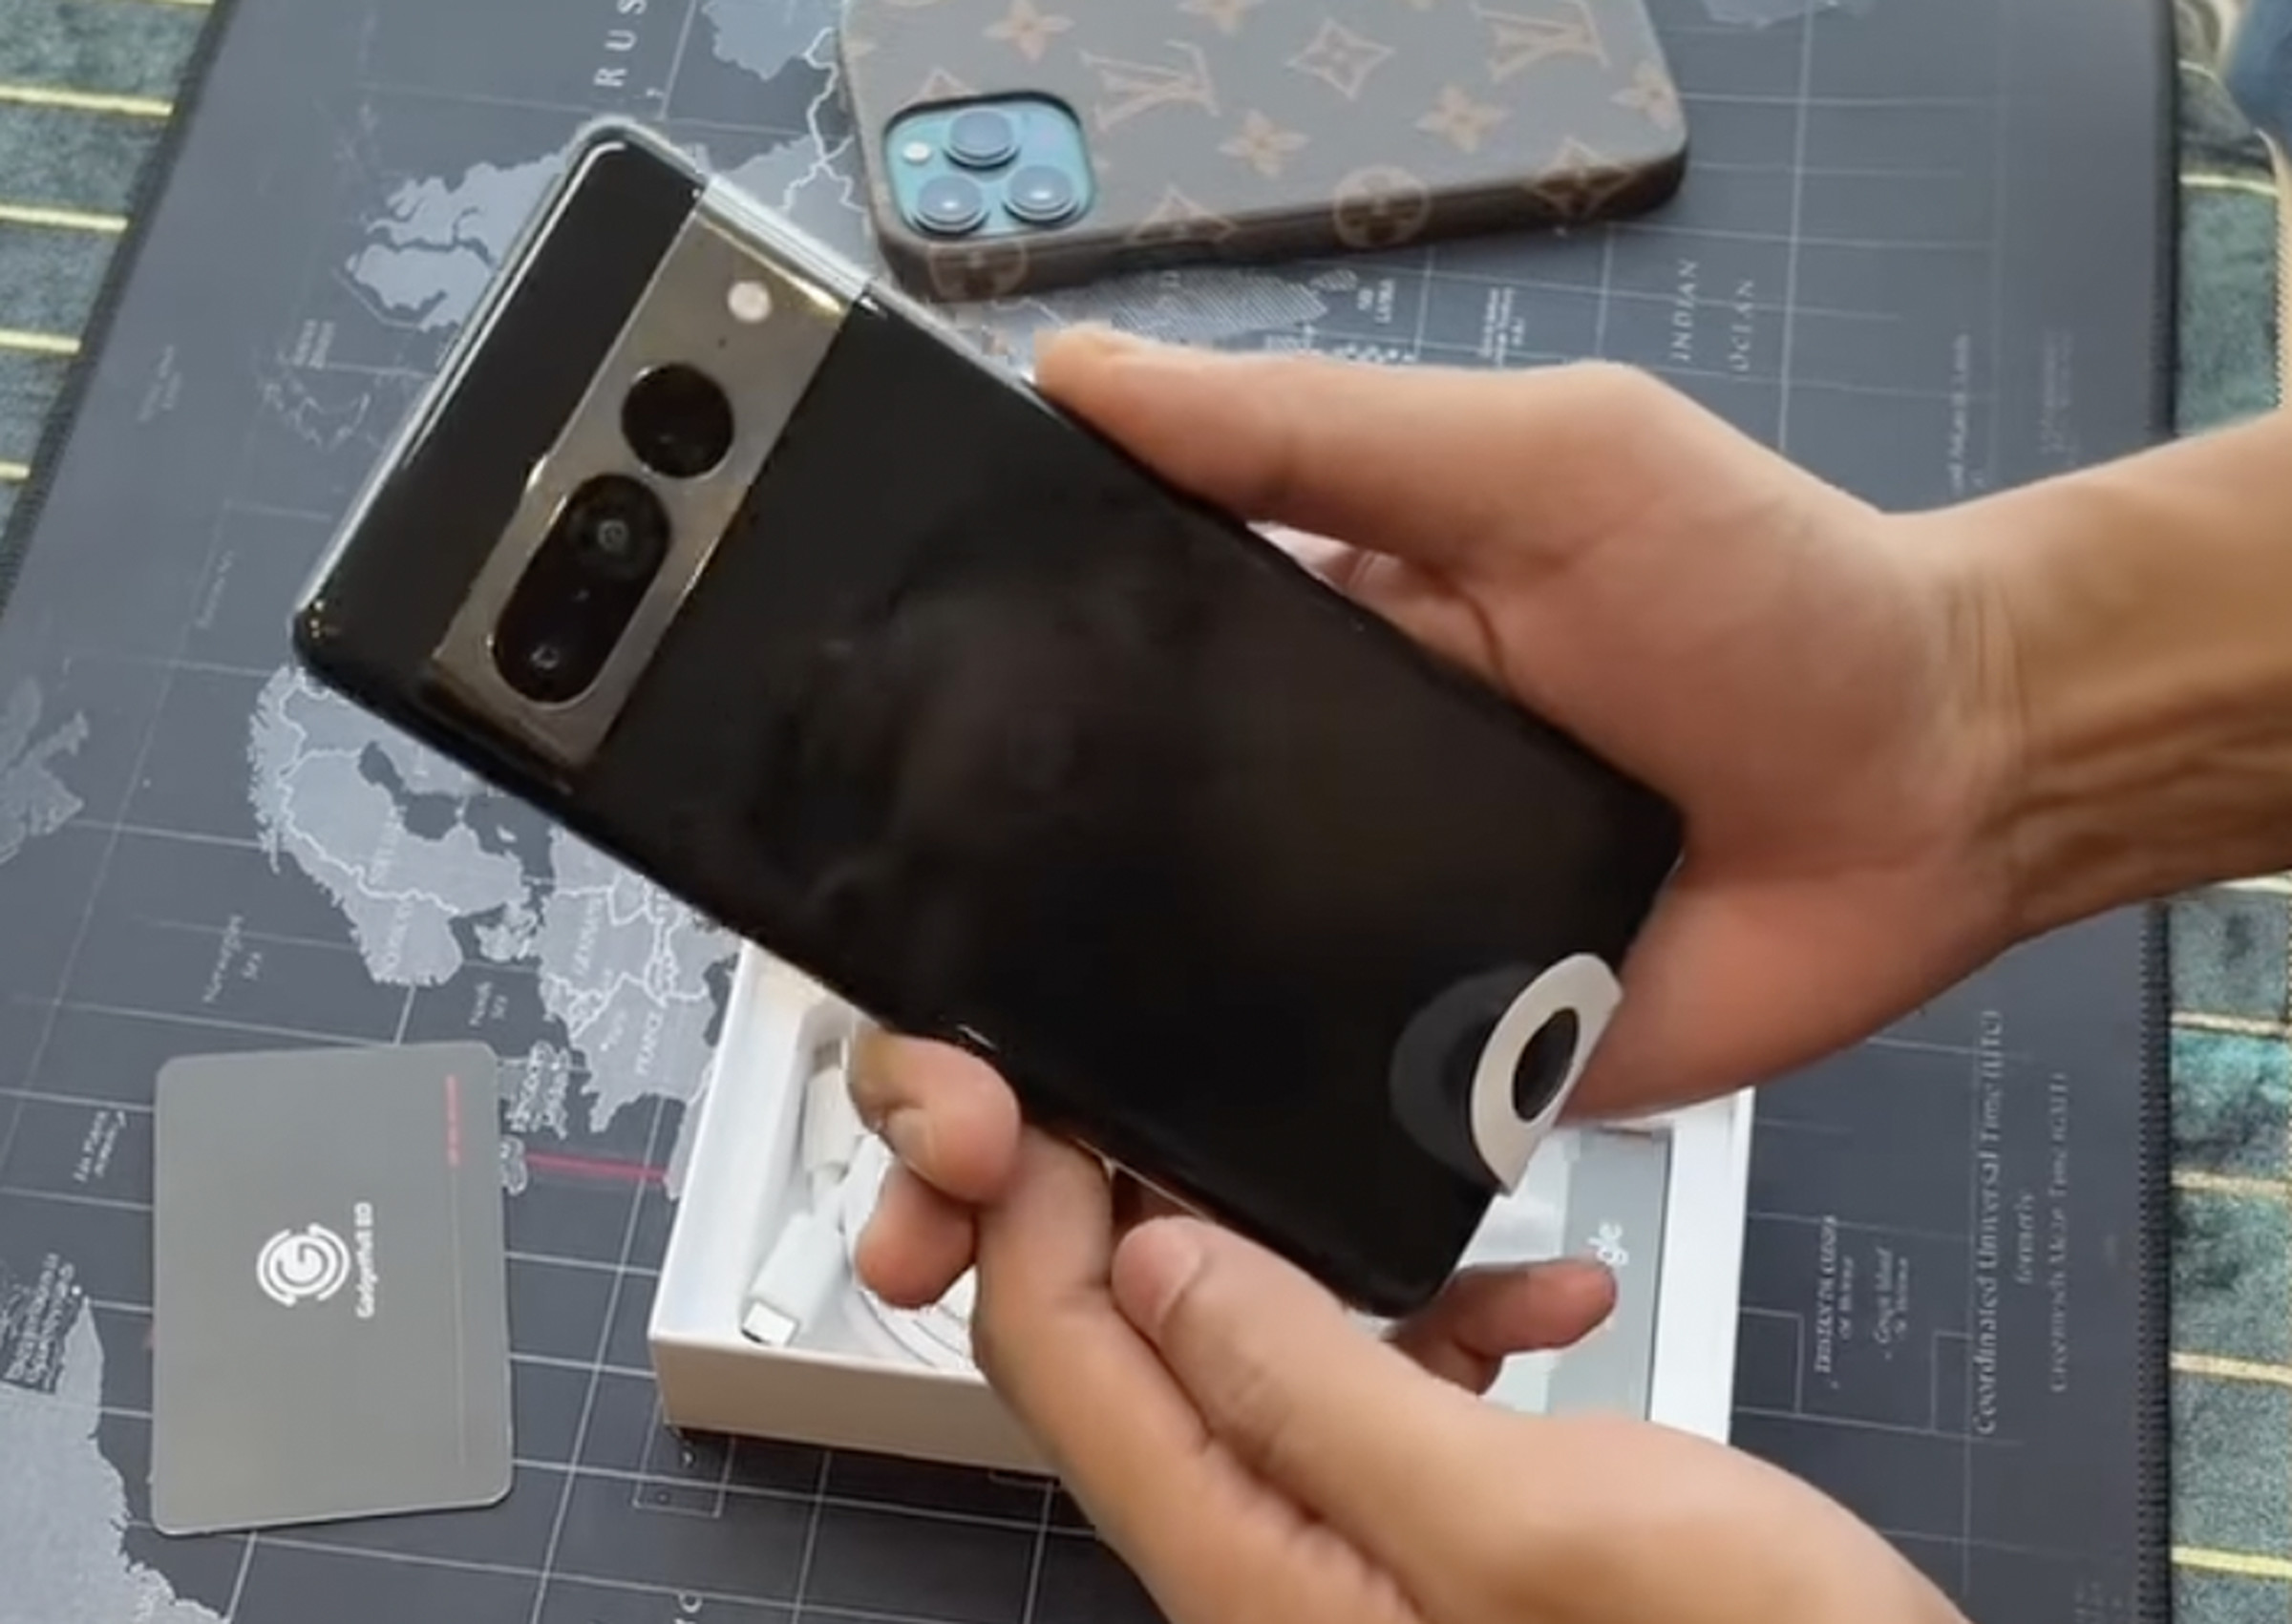 A screenshotted image showing the alleged Pixel 7 Pro in an unboxing video